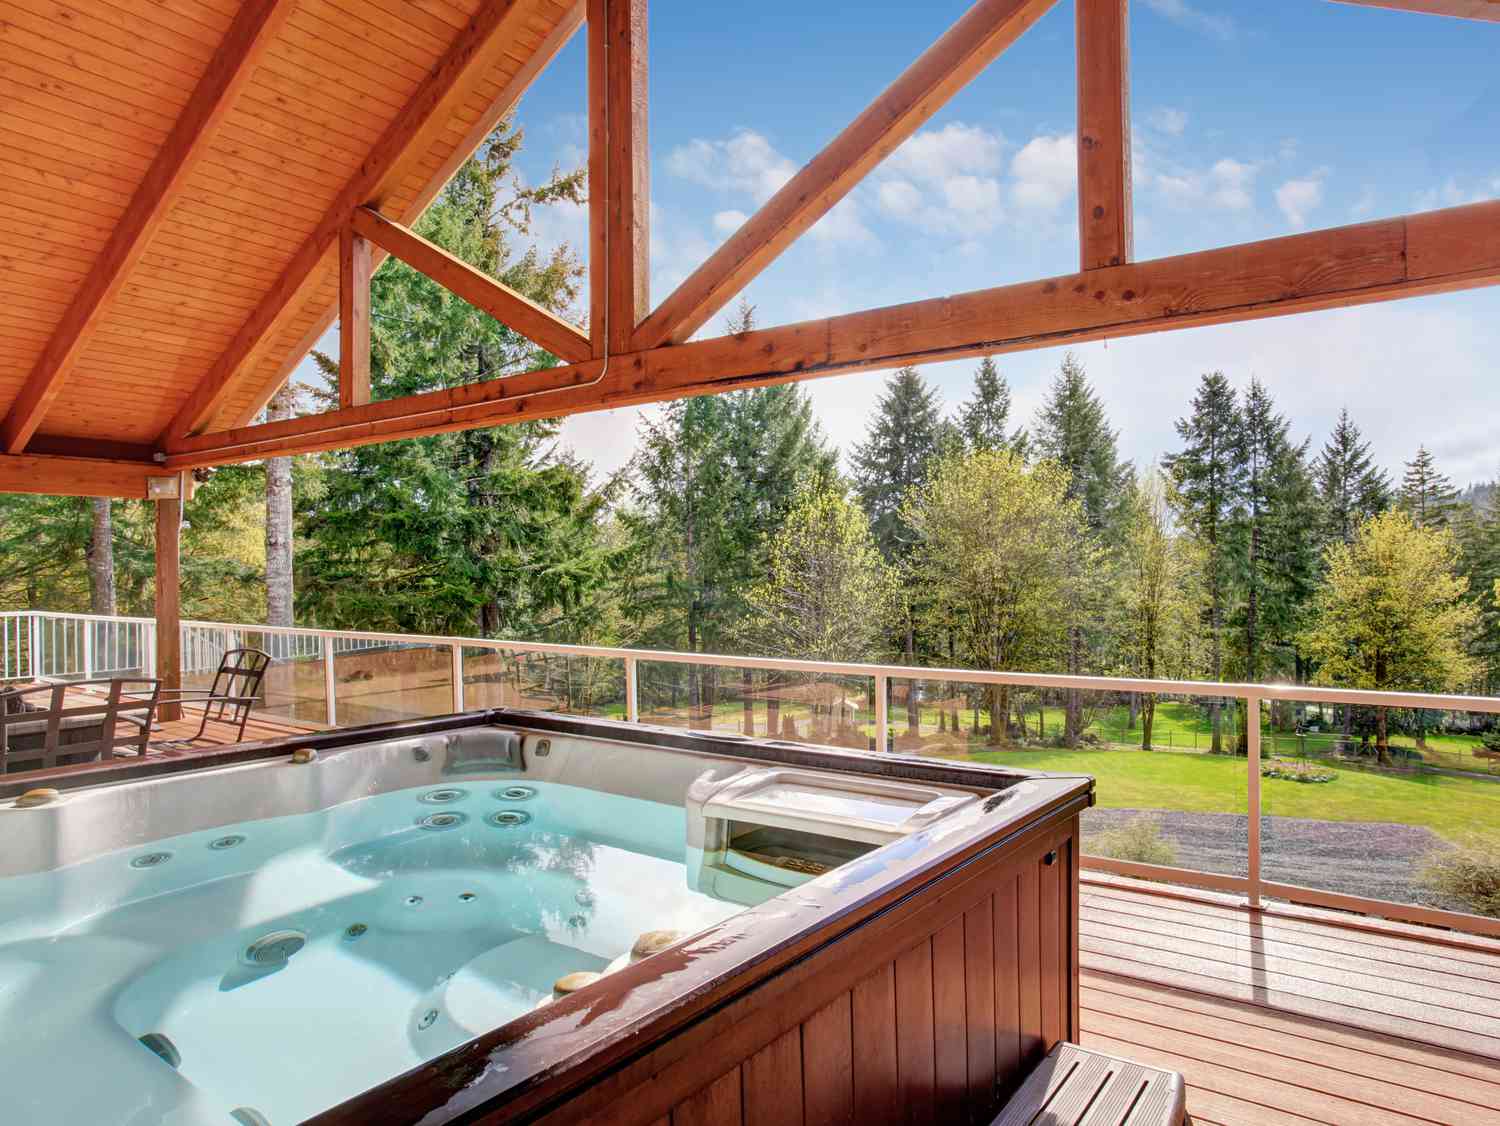 What Is Difference Between A Hot Tub And A Jacuzzi